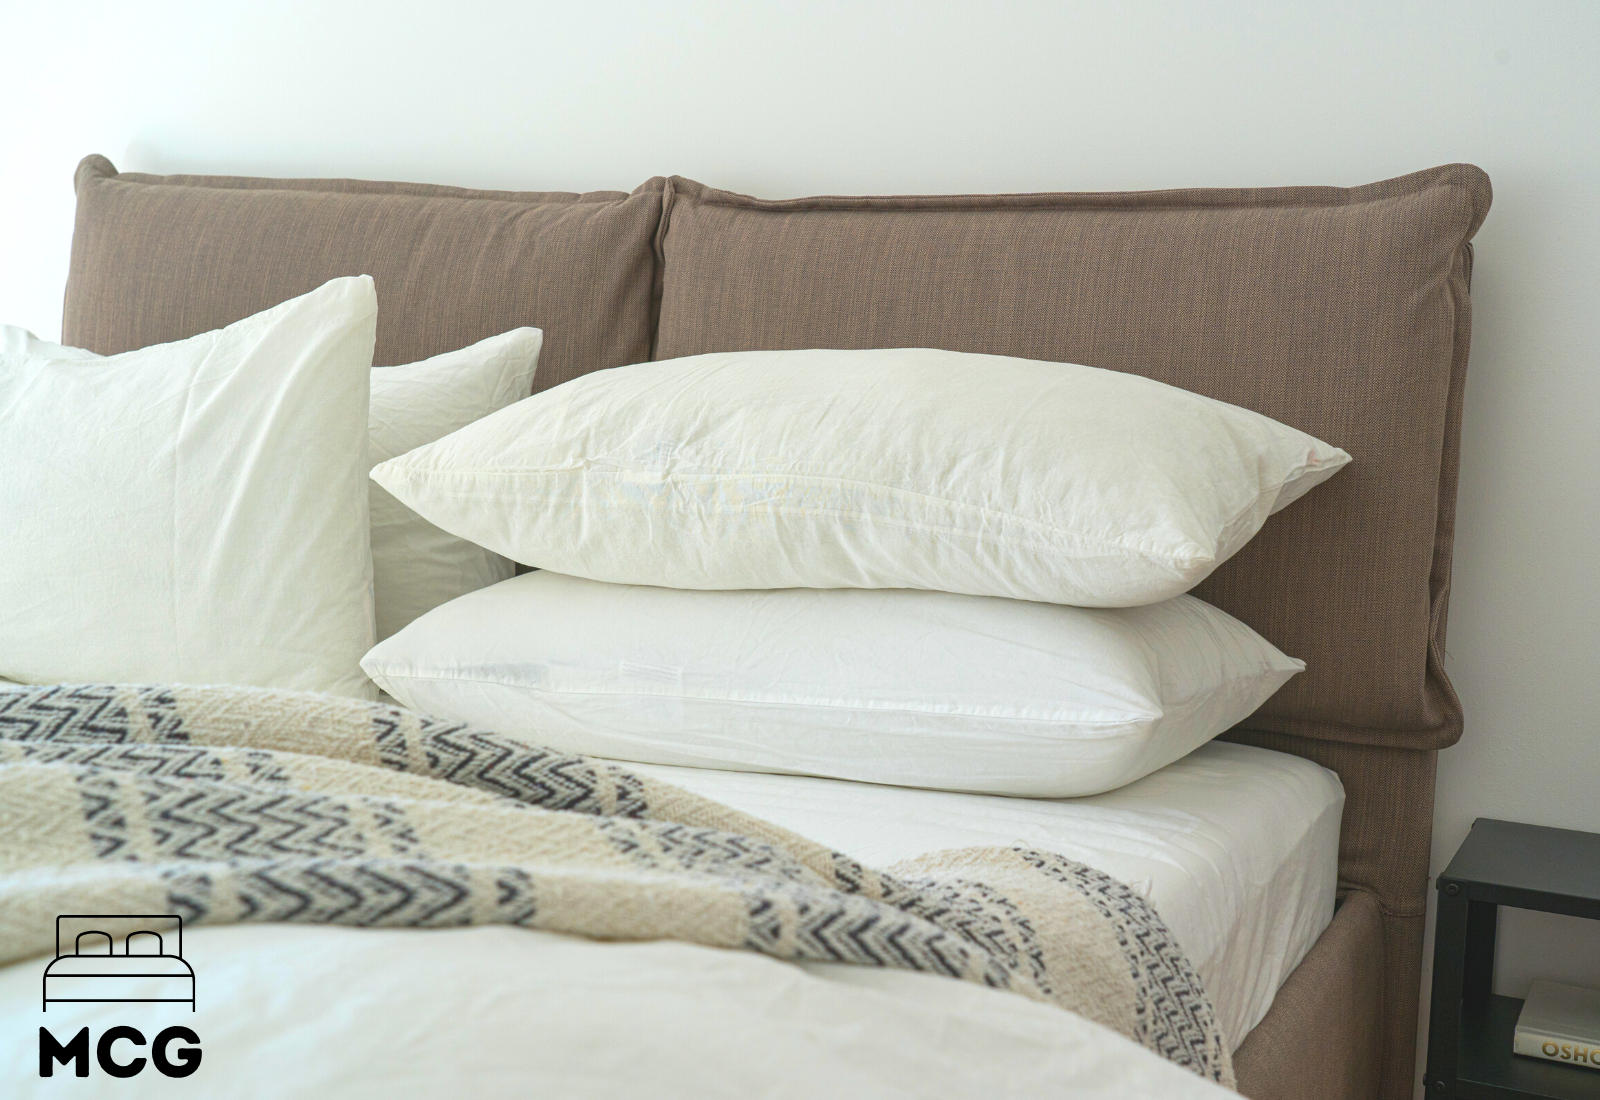 stack of bamboo pillows on a bed